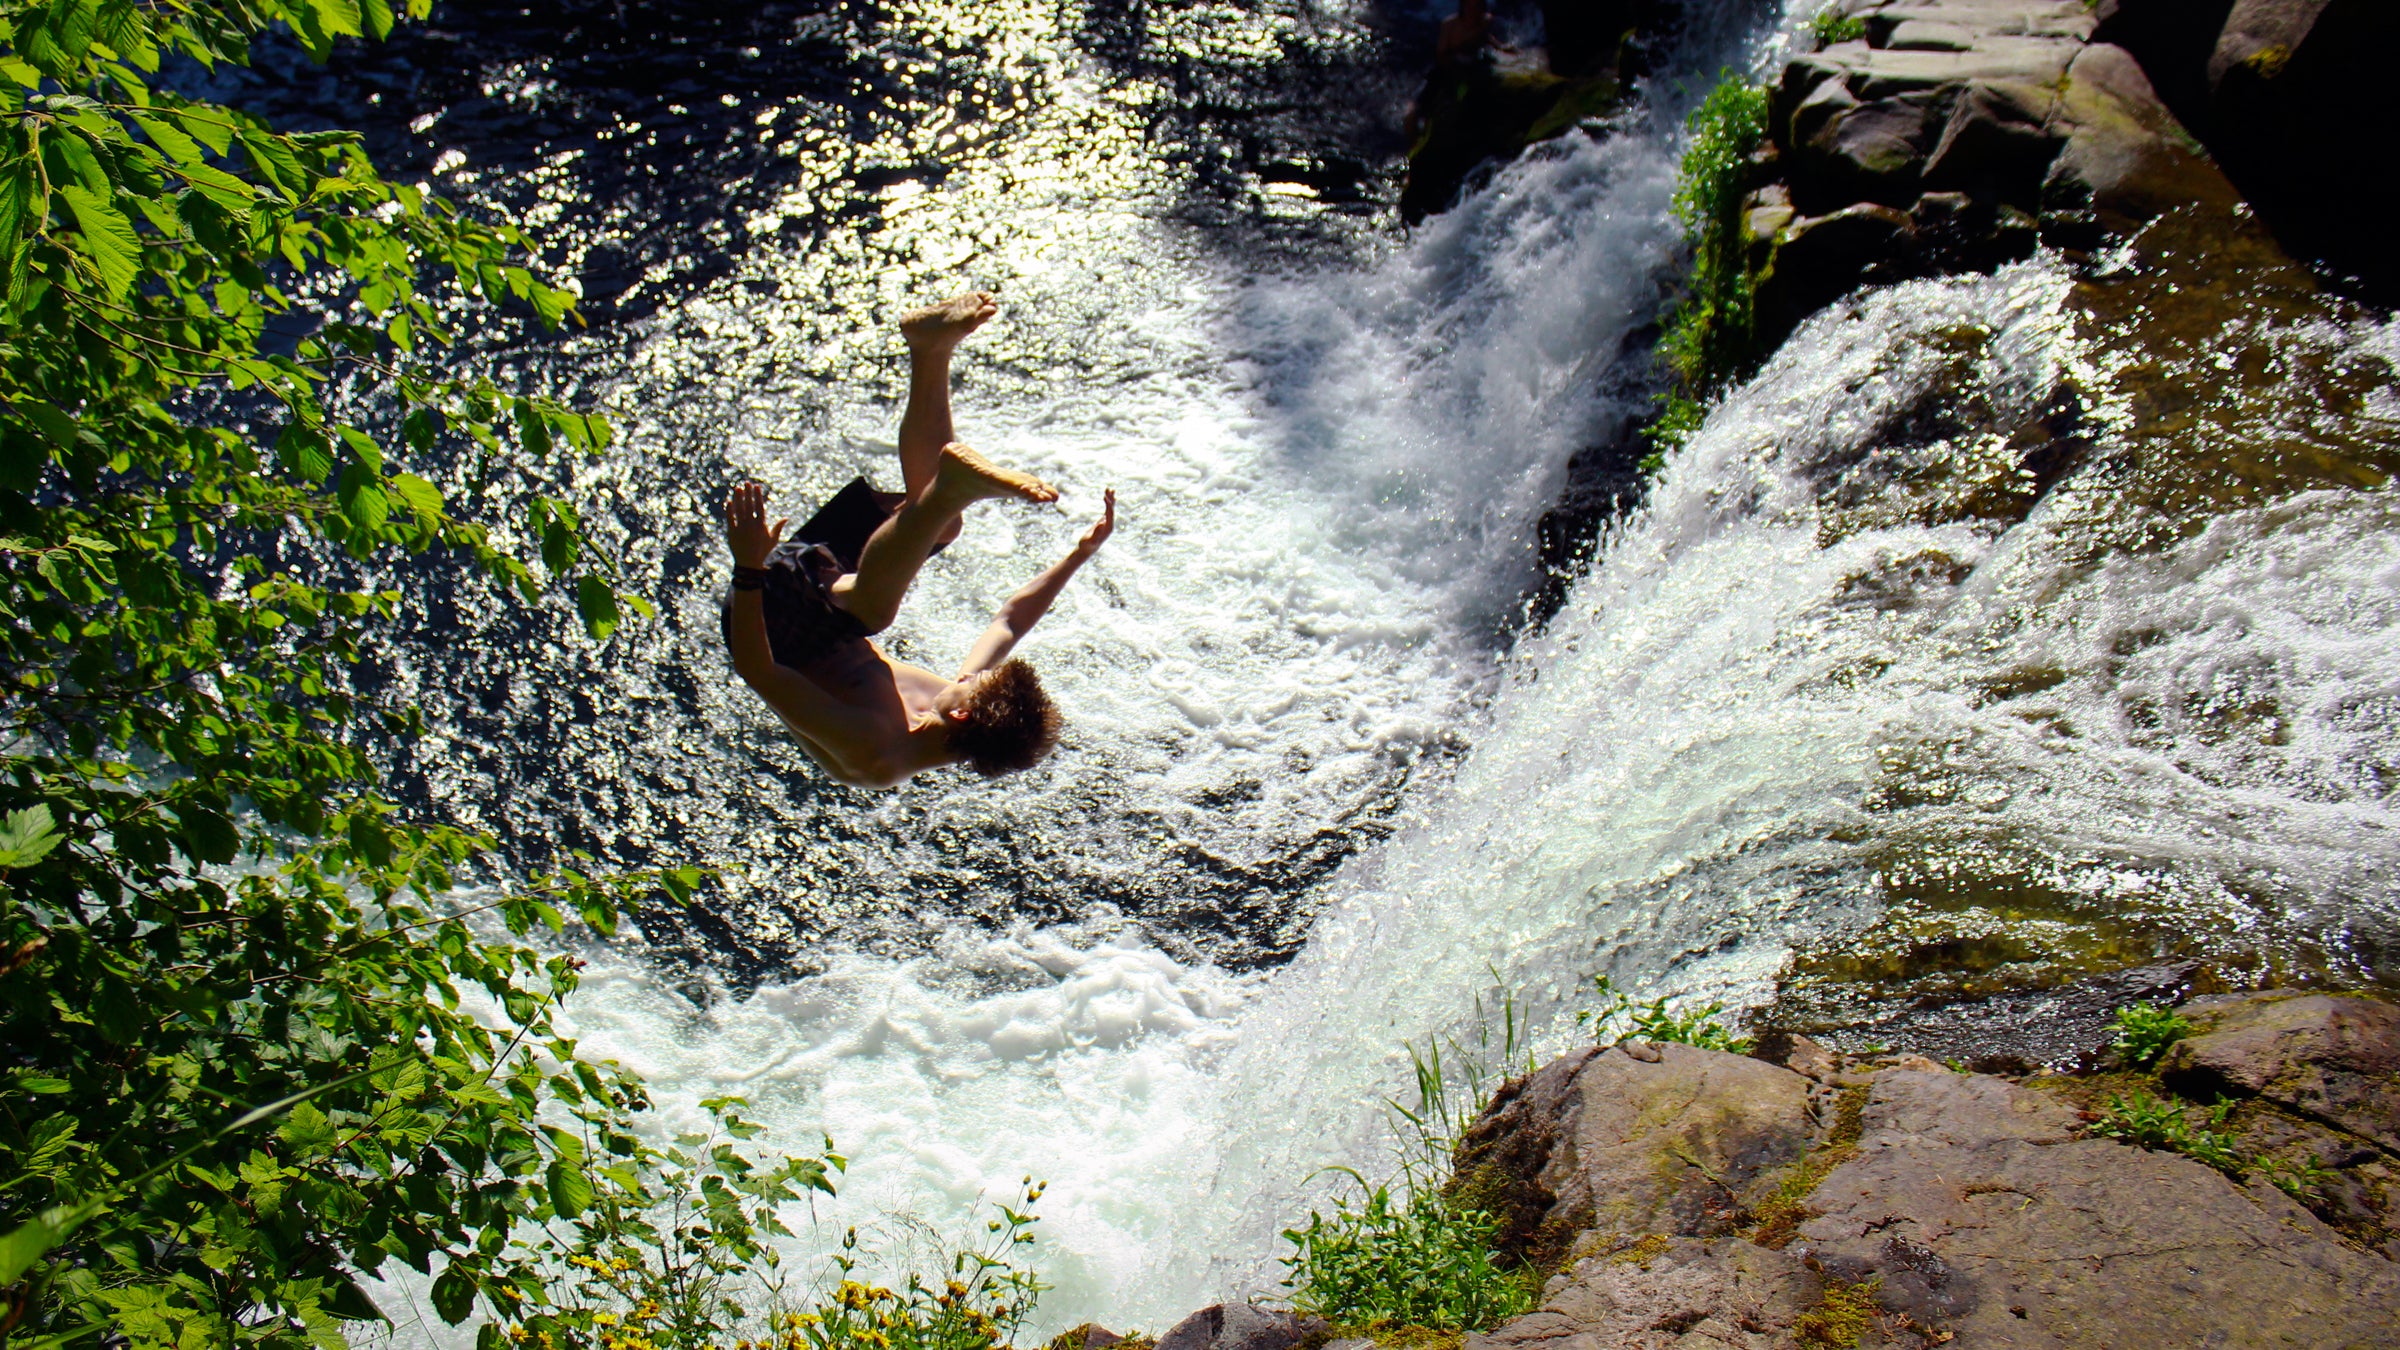 Plunge Into Adventure: Wild and Wonderful Waterfalls, Car Care Articles